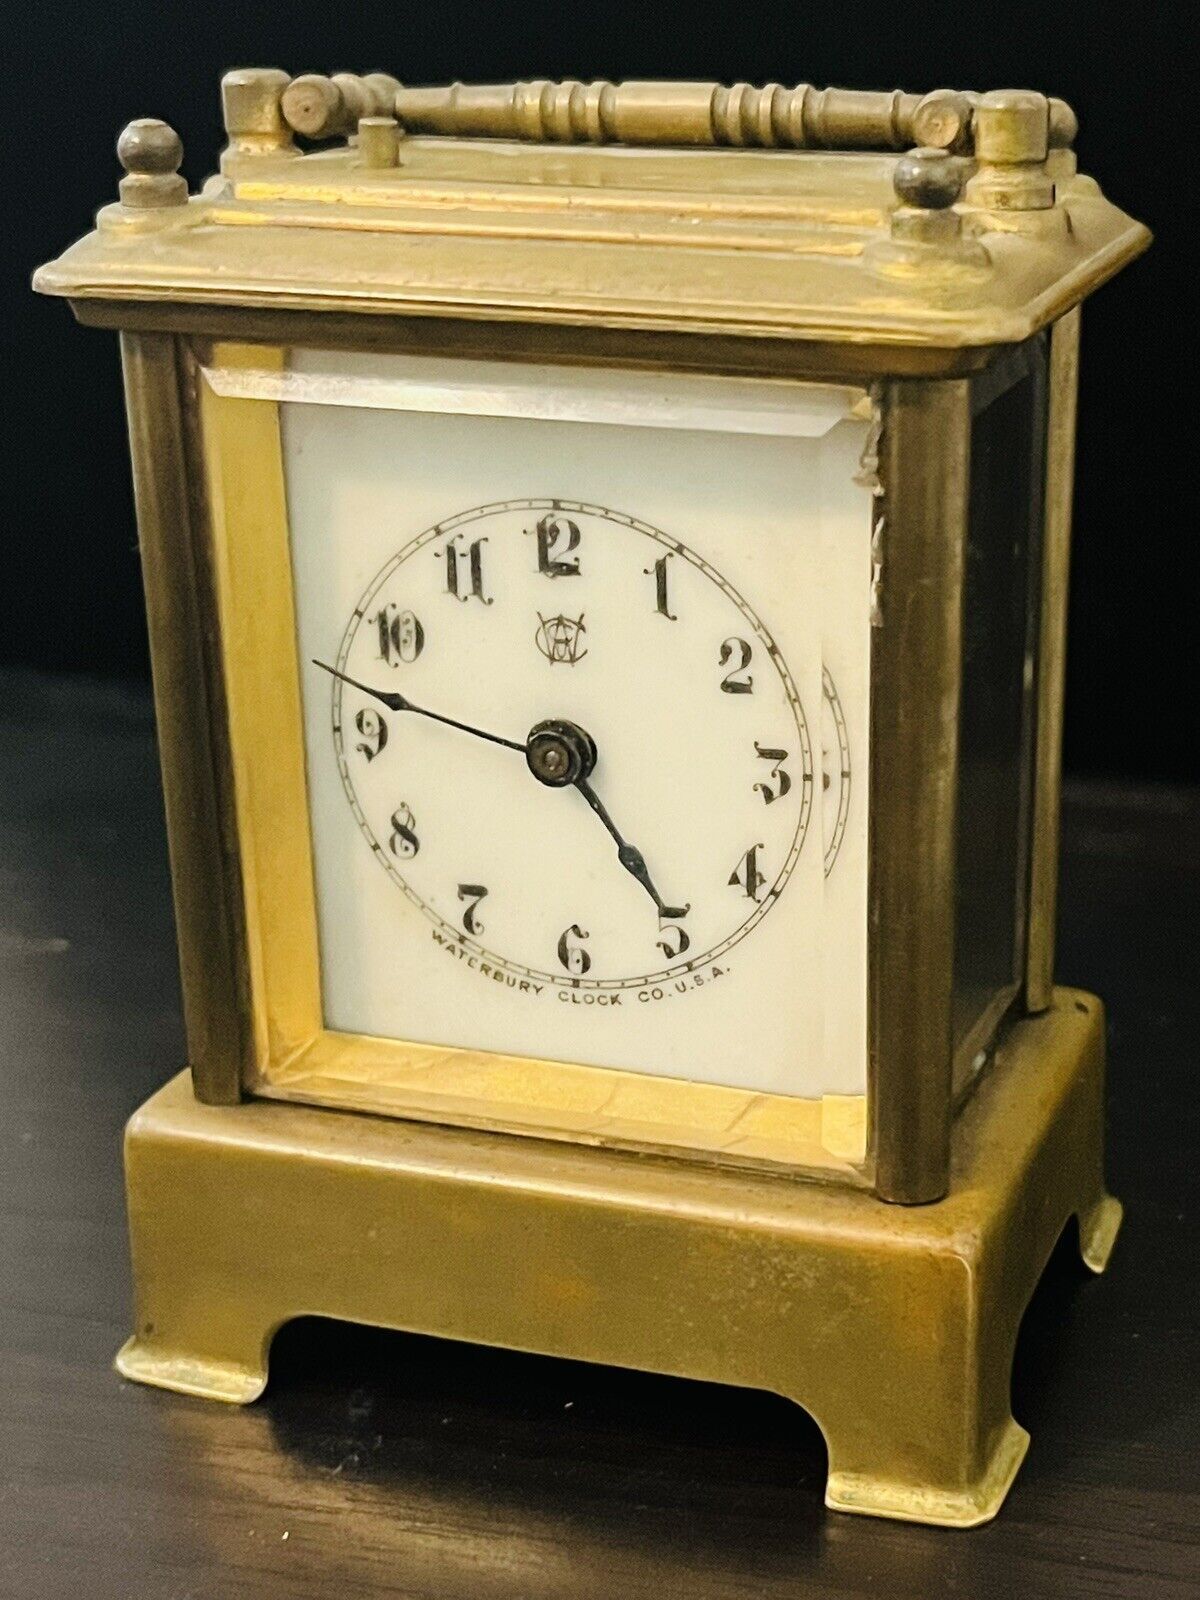 WATERBURY CLOCK CO. SMALL BEVELLED GLASS CHIMING CARRIAGE CLOCK -Porcelain Face